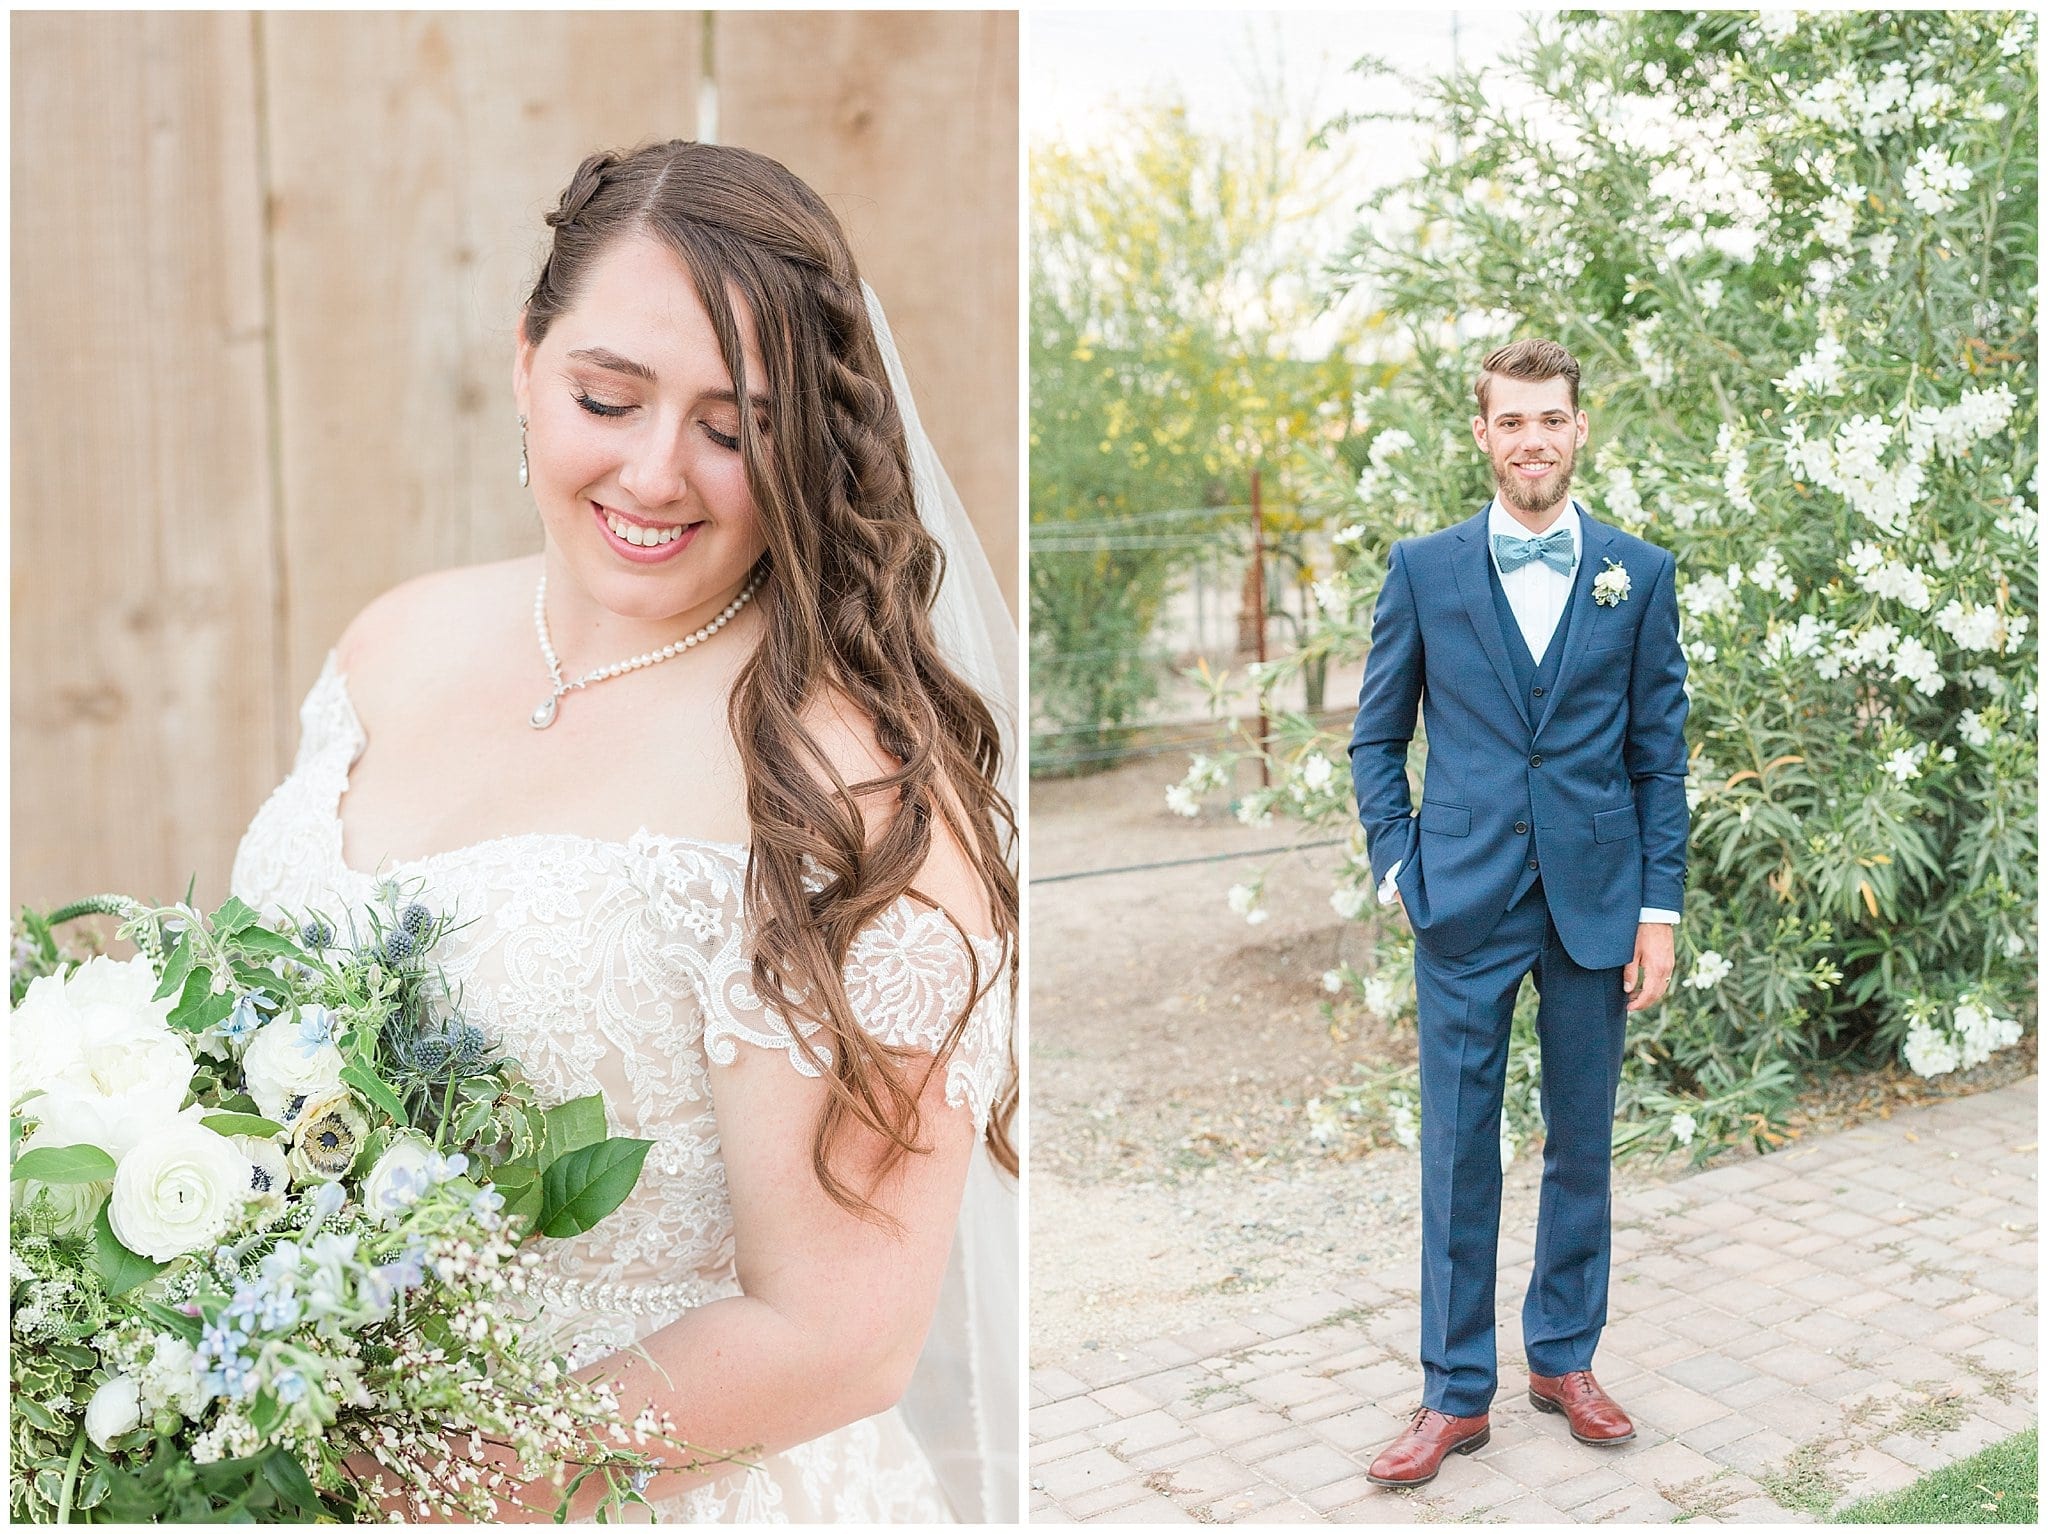 Windmill Winery Twisted Tree Ceremony Location | Husband and Wife Portraits